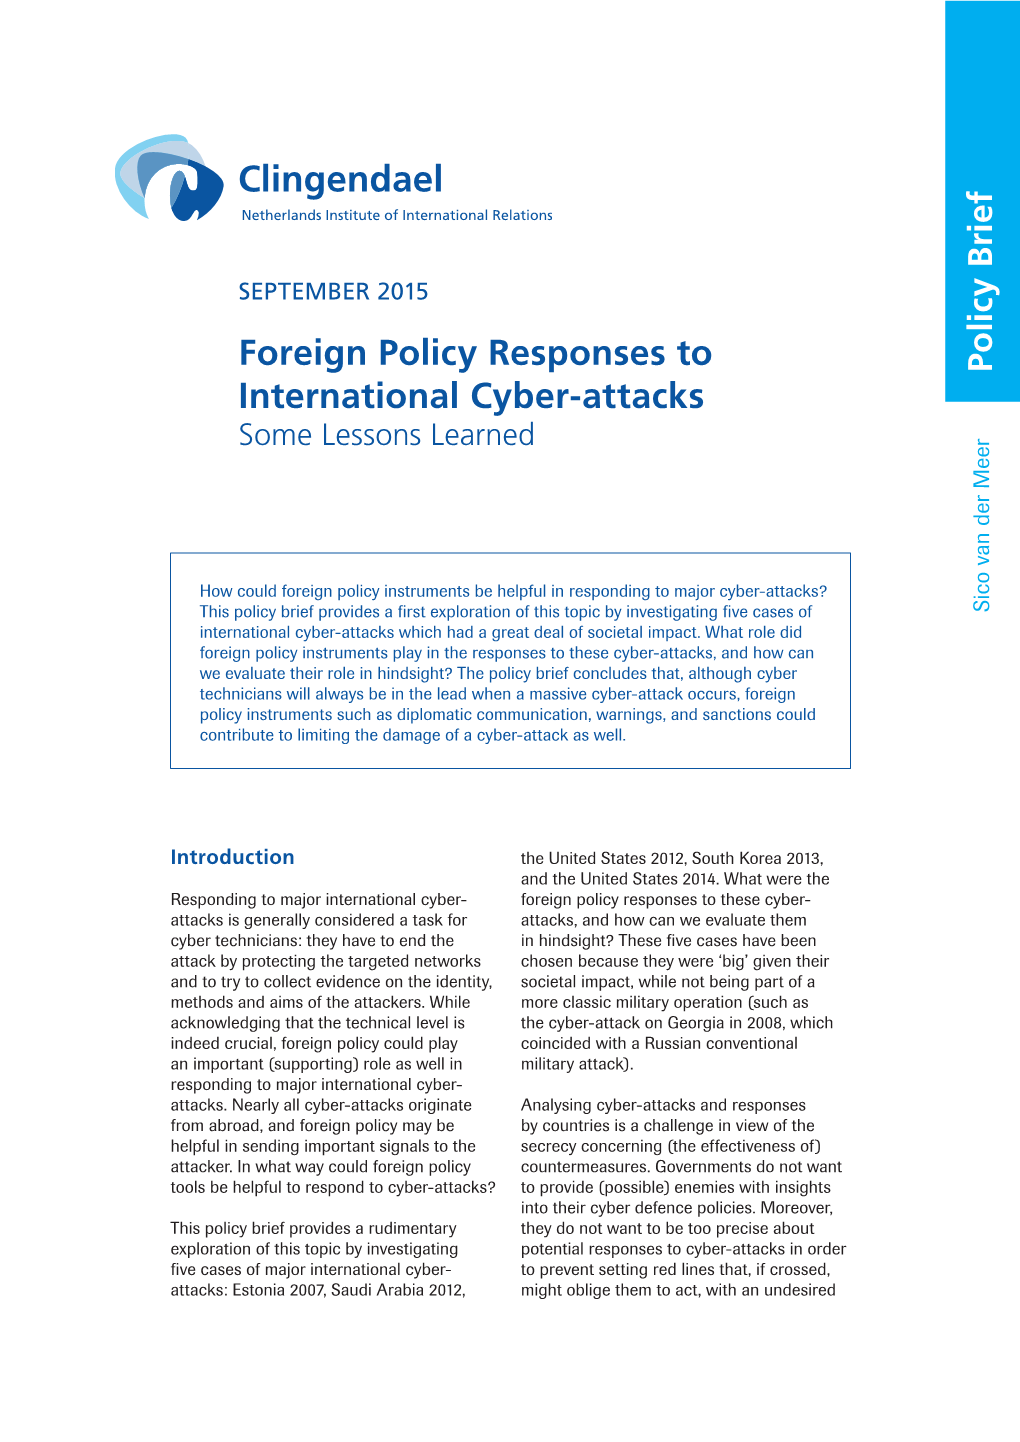 Foreign Policy Responses to International Cyber-Attacks